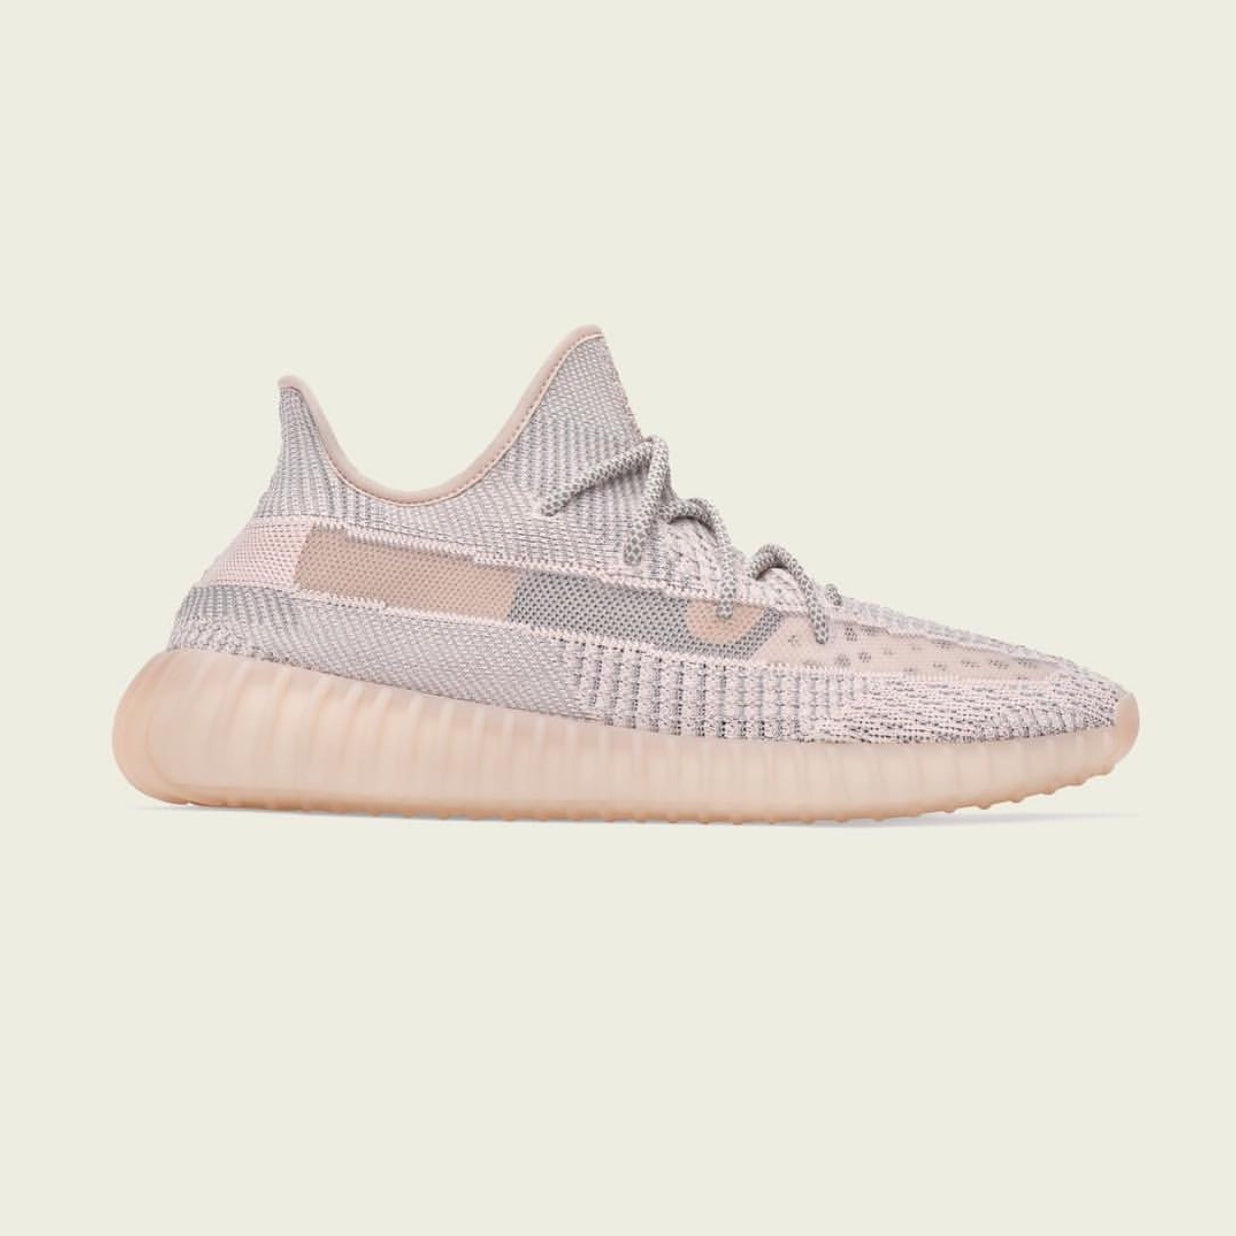 yeezy synth price